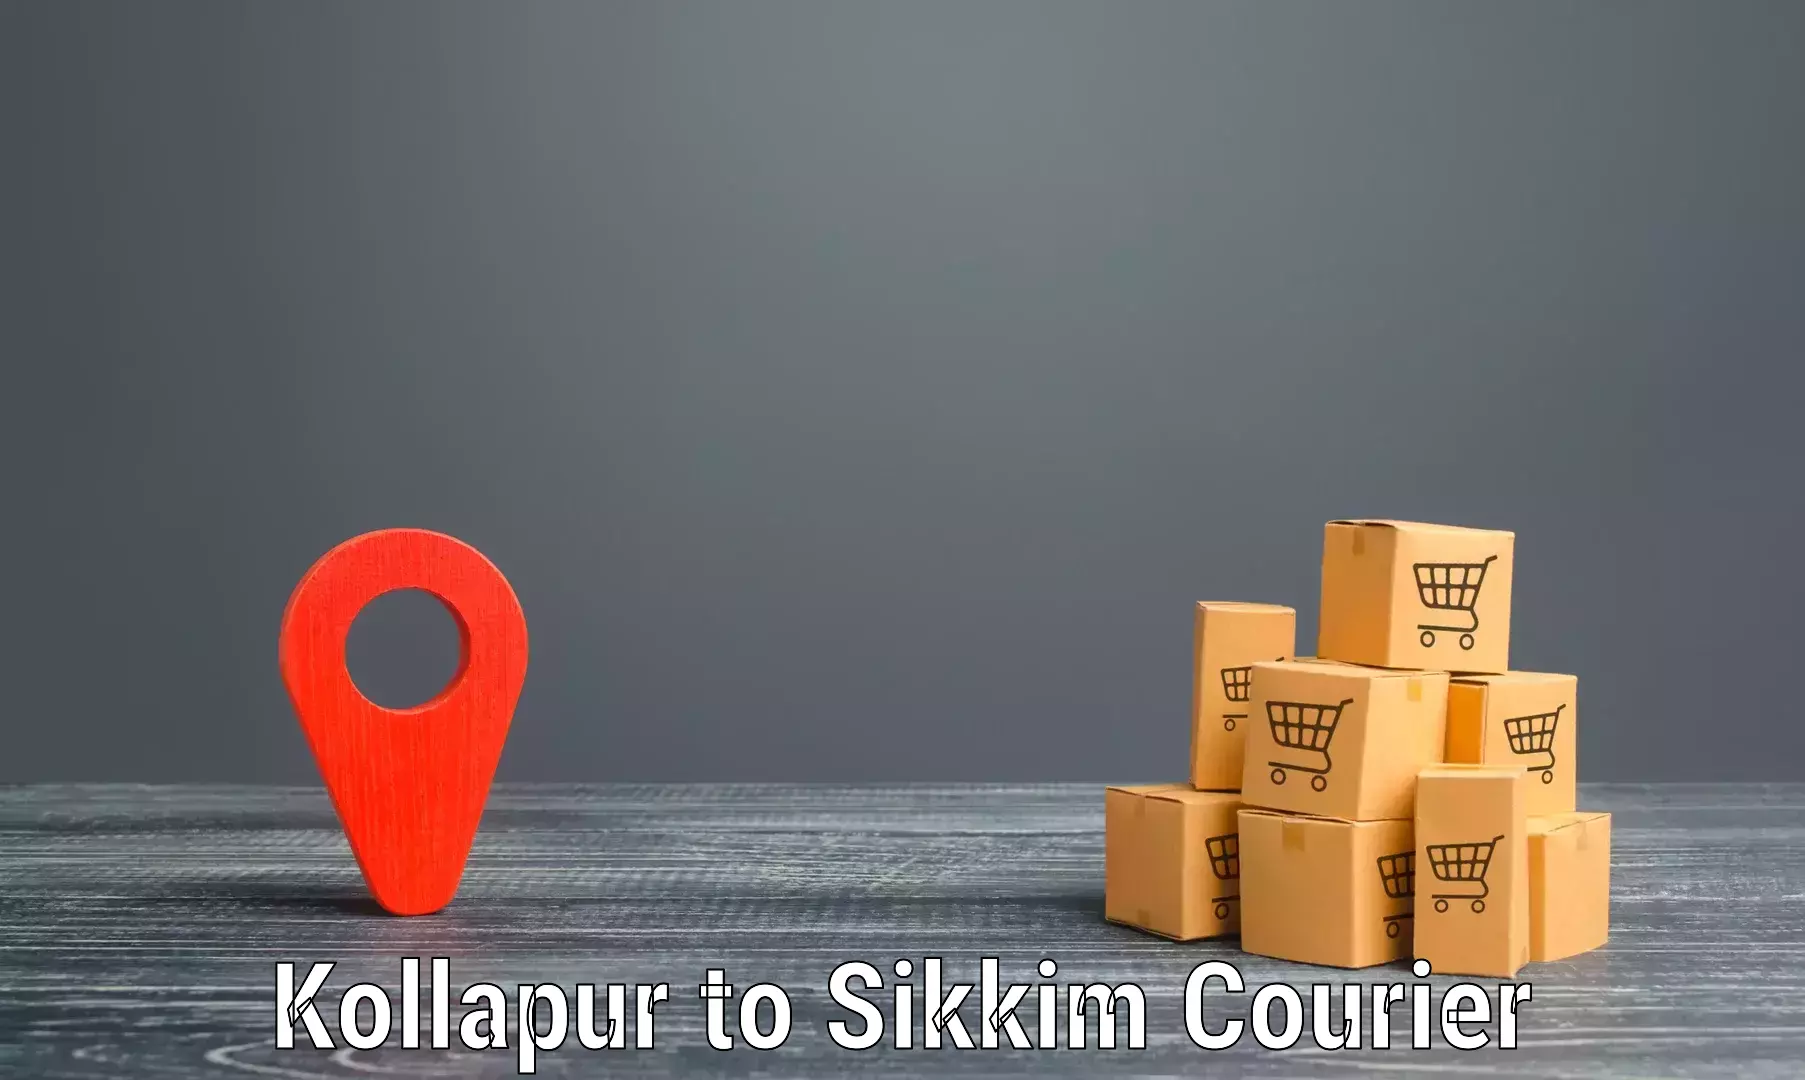 Speedy delivery service Kollapur to Pelling